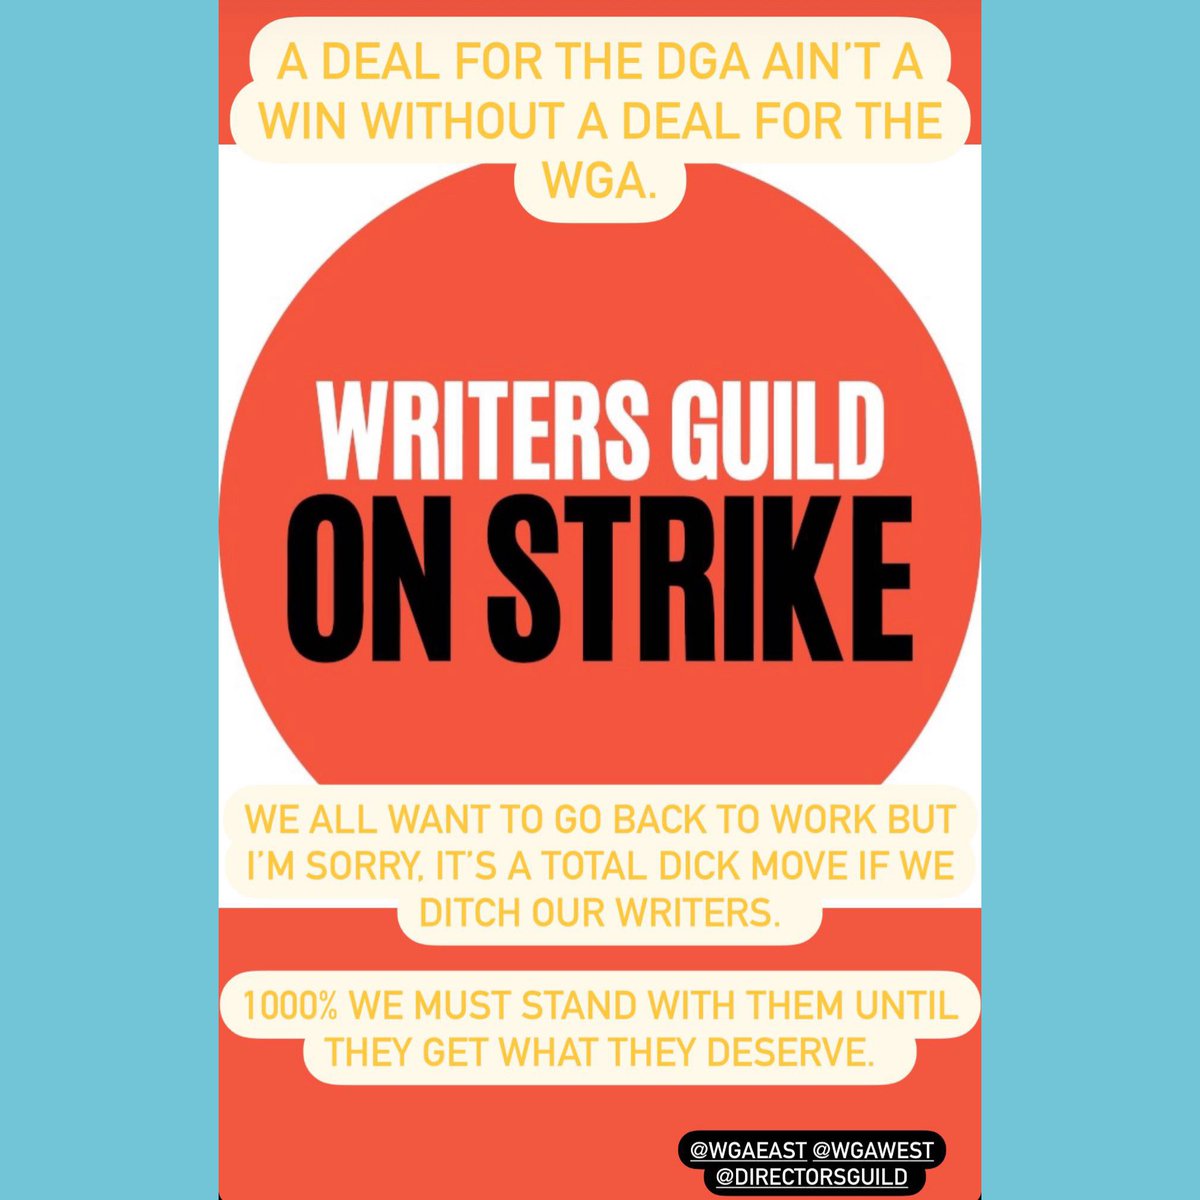 HEADS UP:  A DEAL FOR THE DGA IS NOT A WIN WITHOUT A DEAL FOR OUR BROTHERS IN THE WGA.  #solidarity 
instagram.com/stories/reedmo…